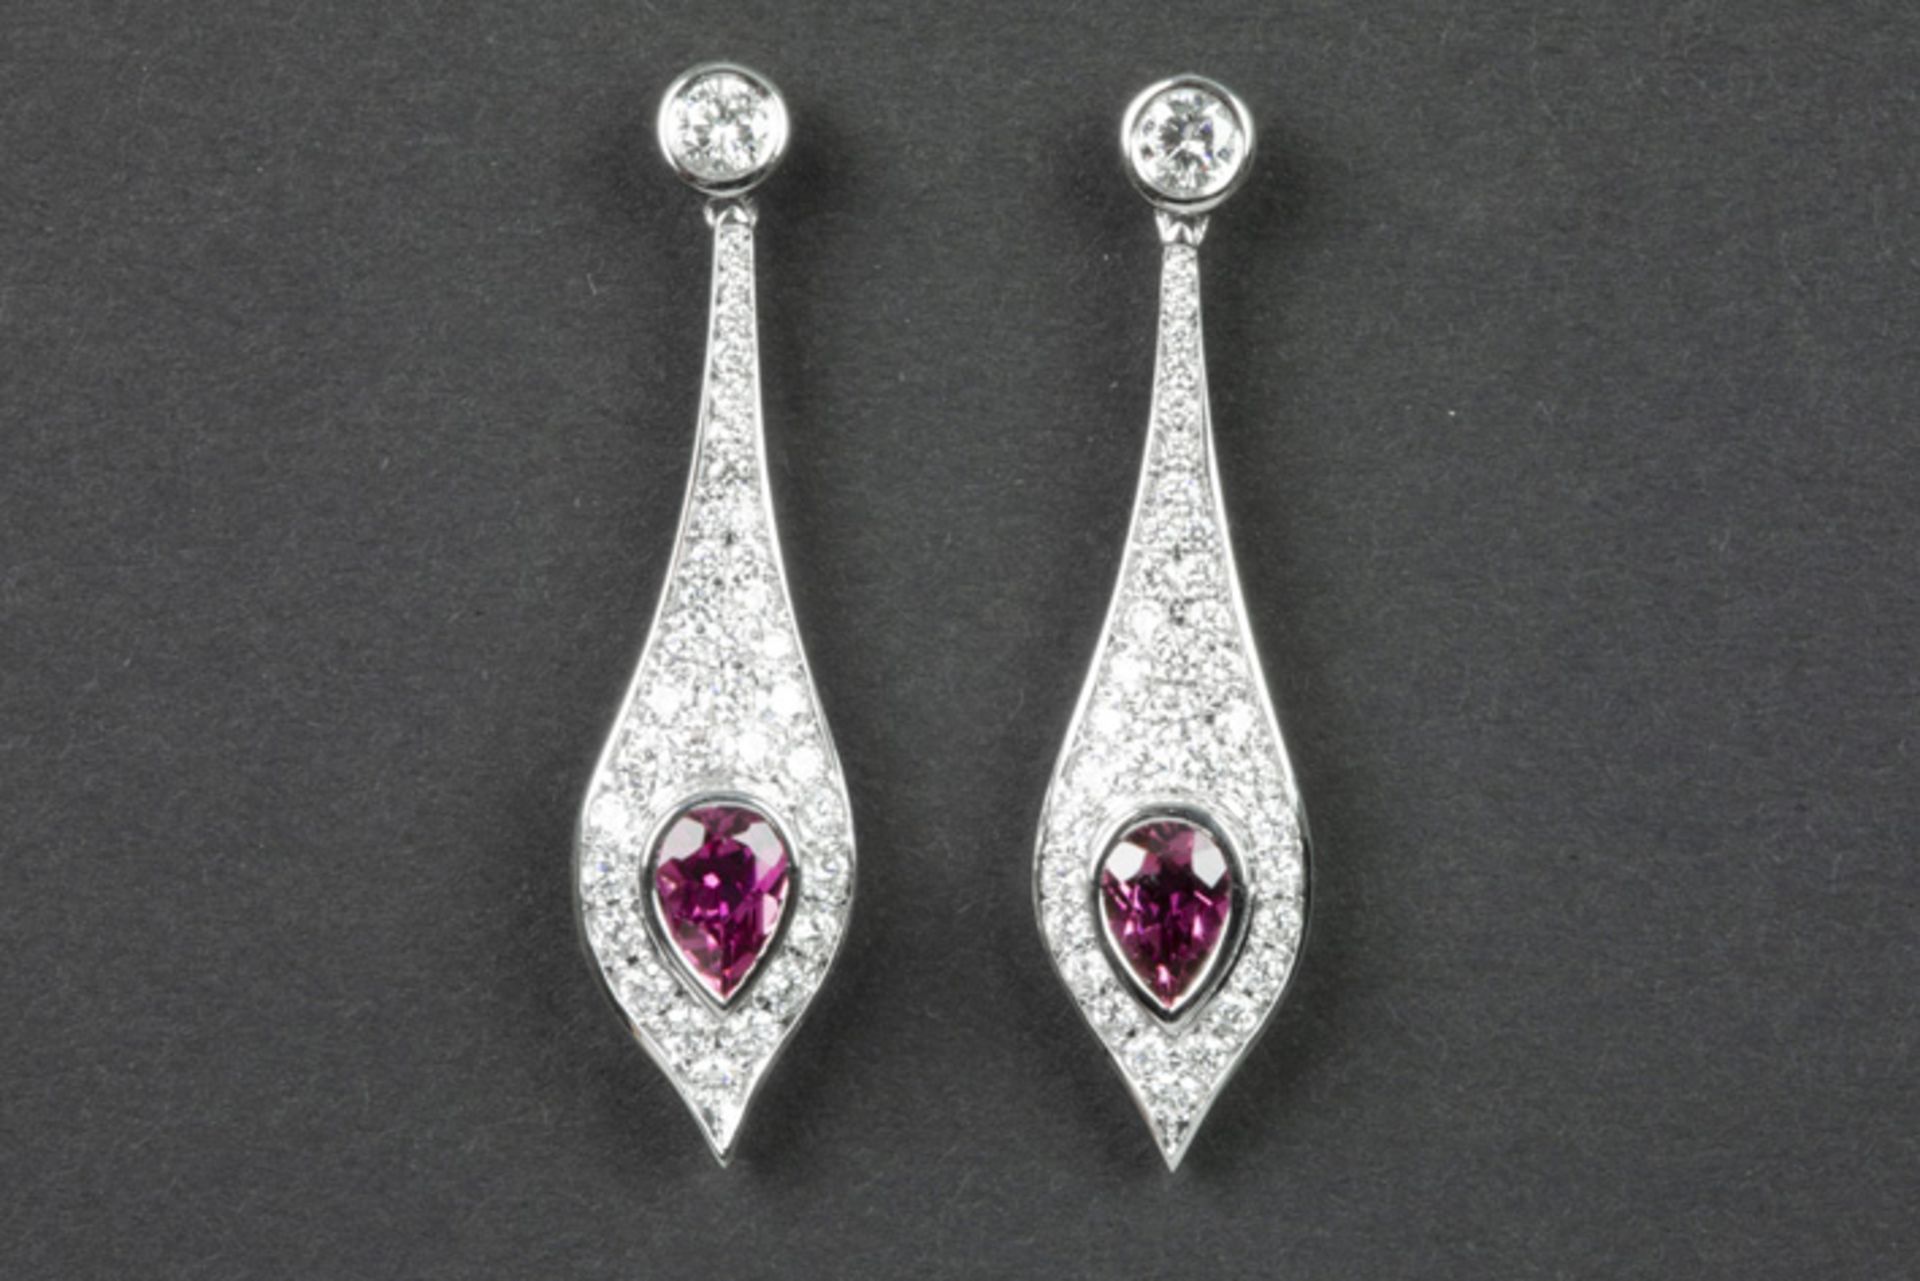 superb pair of handmade earrings in white gold (18 carat) with more then 1,50 carat of pink